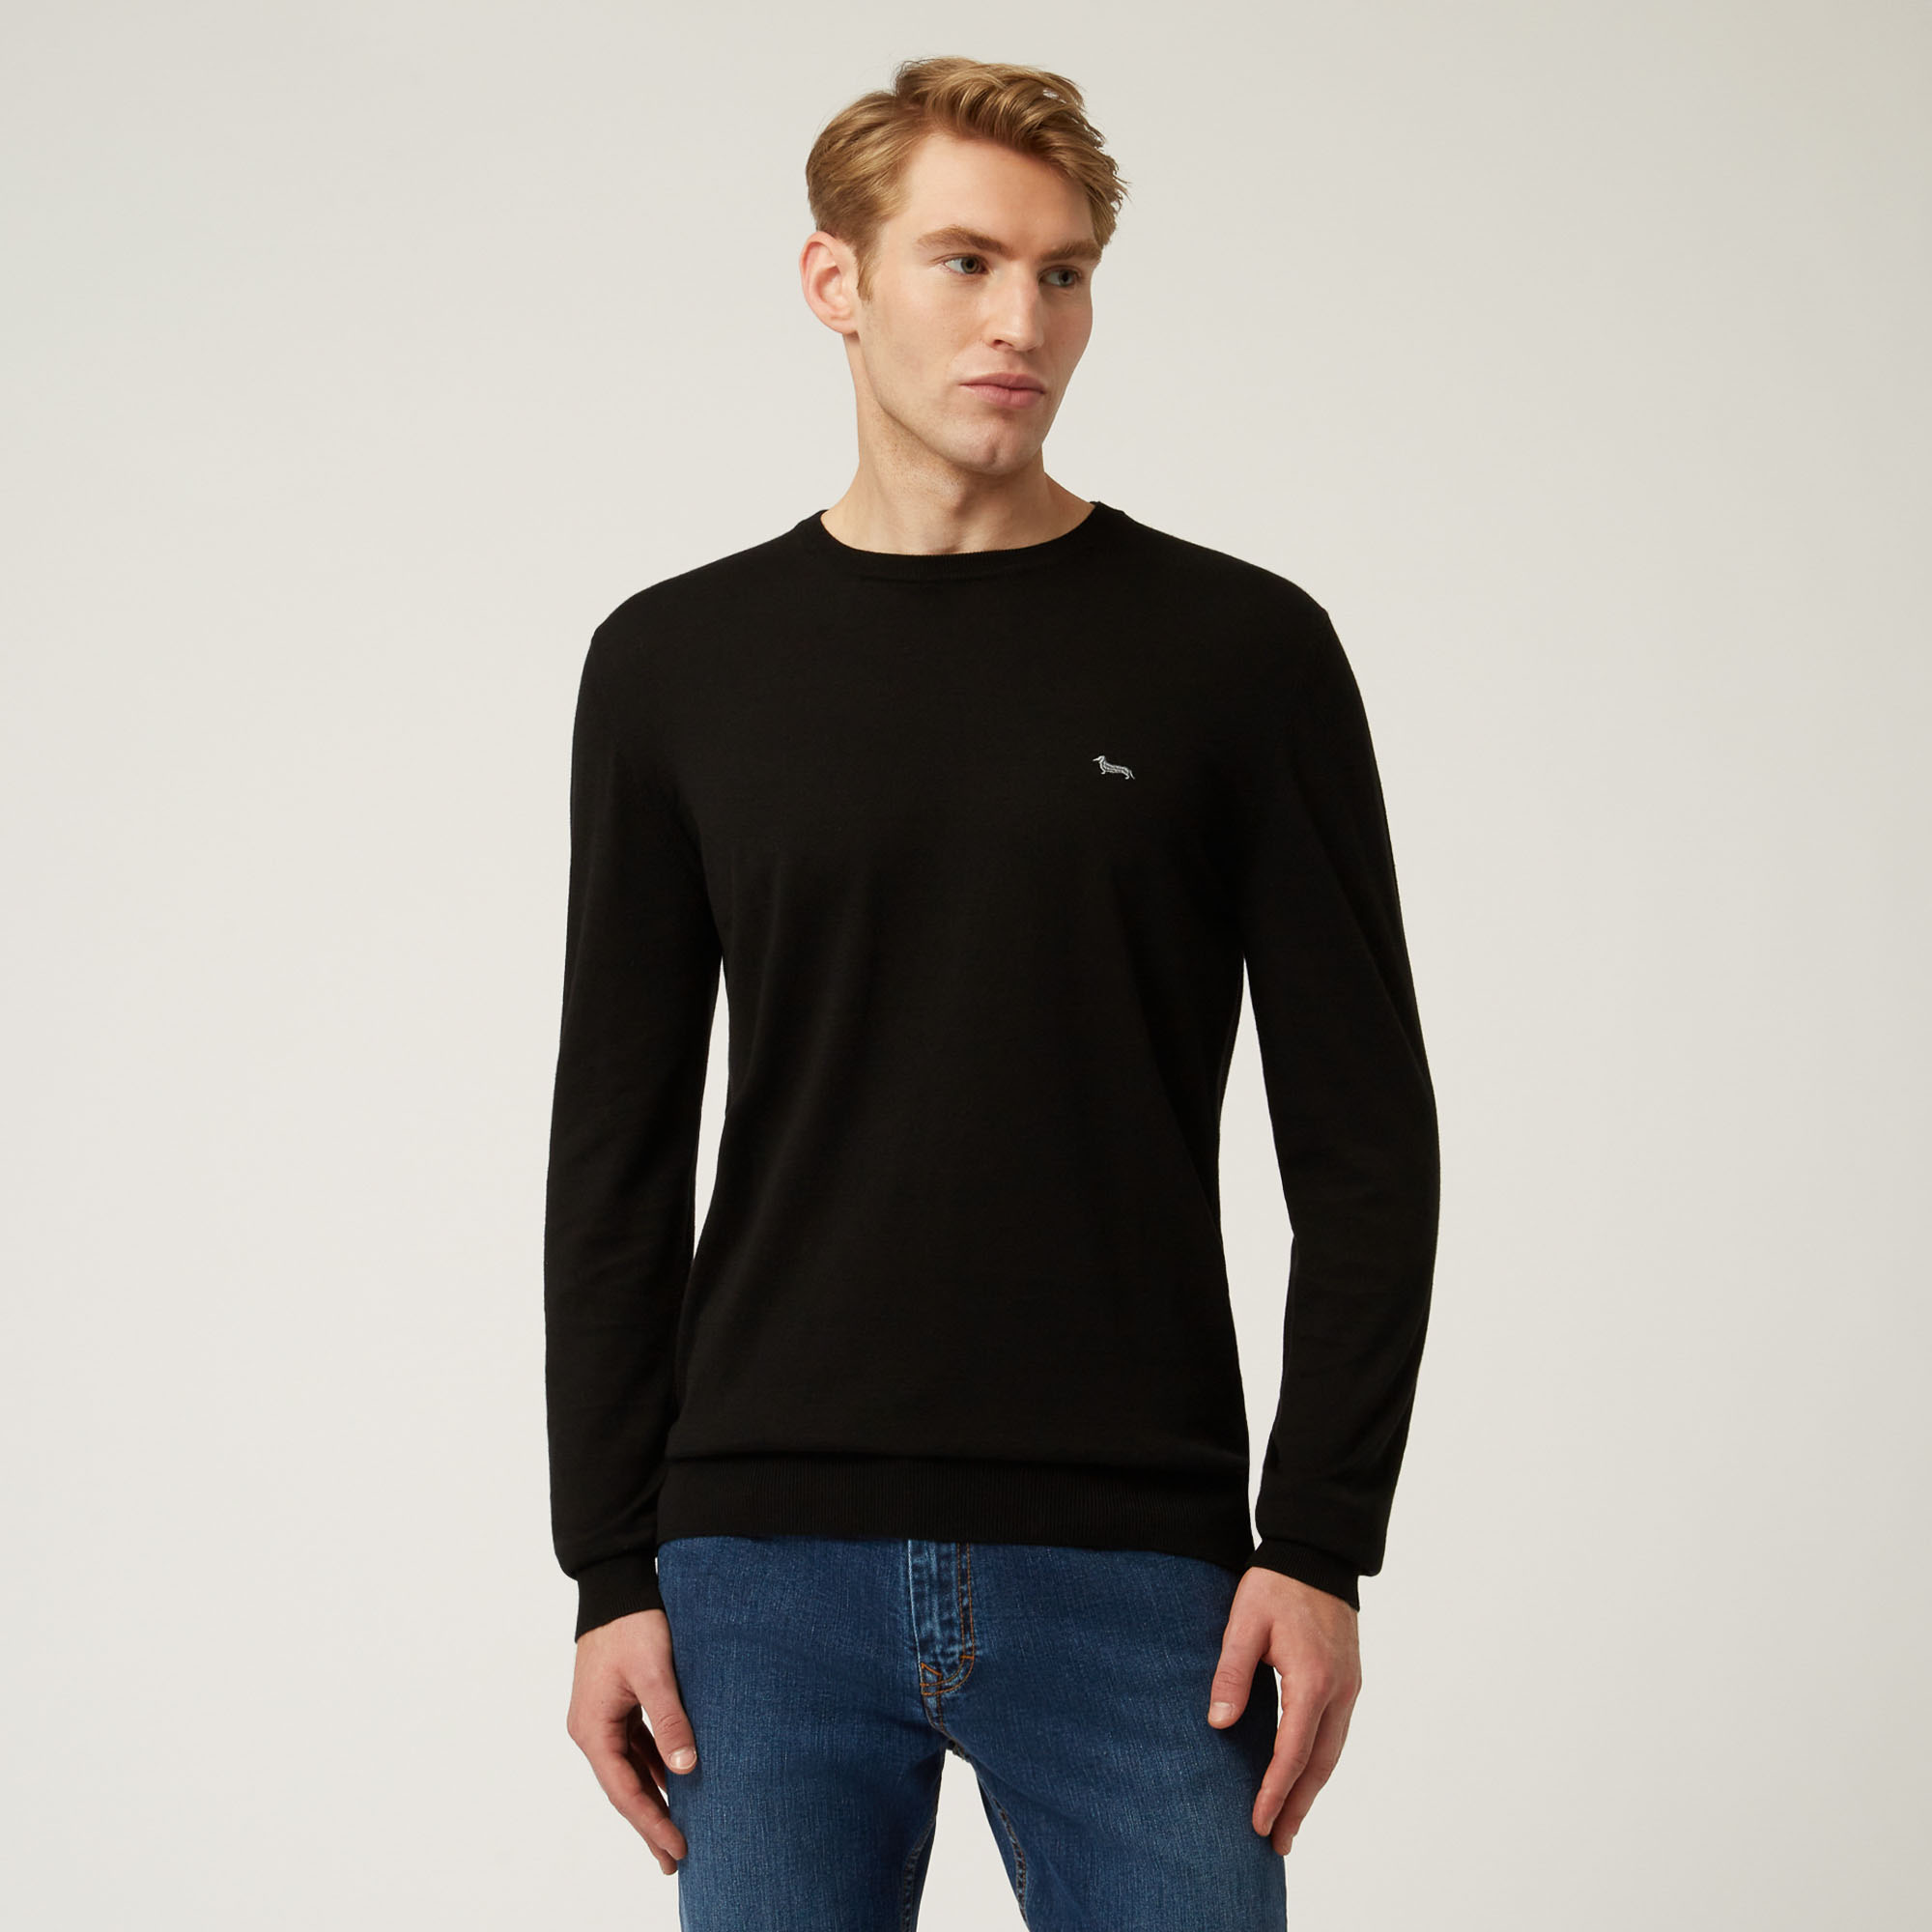 Essentials cotton and cashmere sweater, Black, large